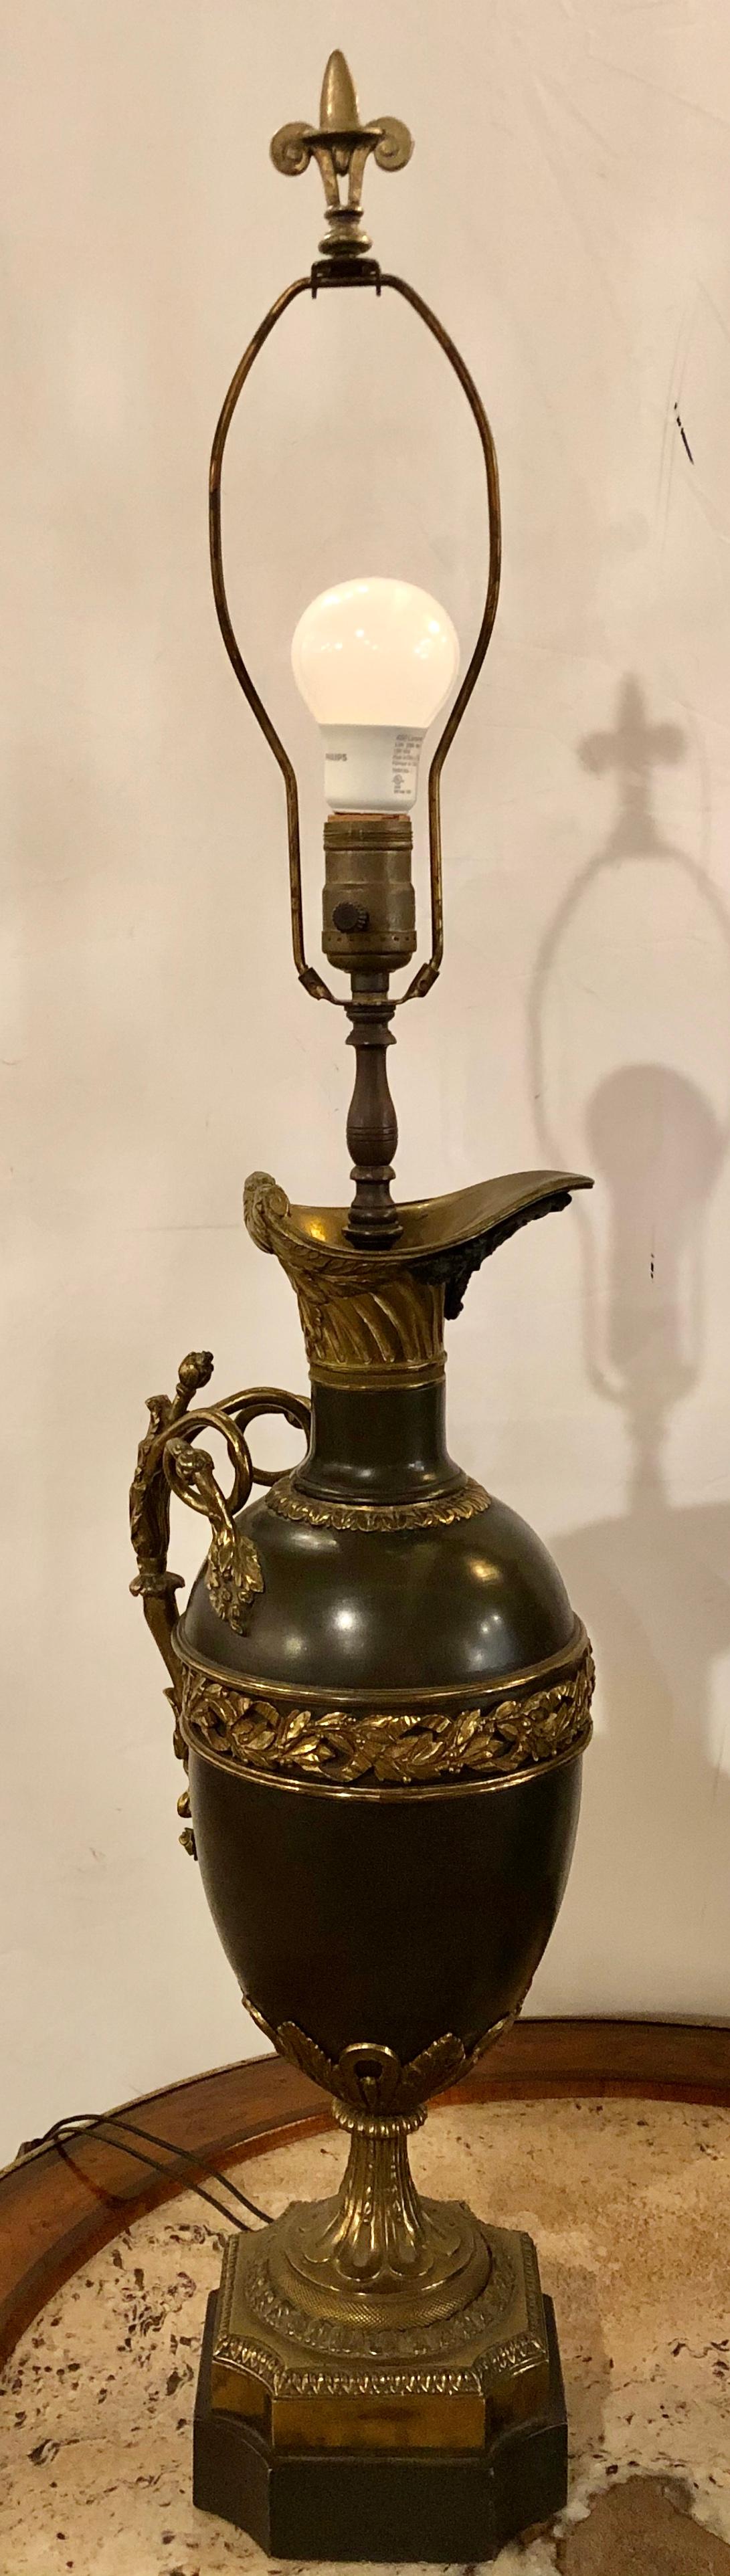 19th century bronze ewer urn form table lamps. A pair of Louis XVI style neoclassical fashioned table lamps having a wreath flanking a bearded man. The whole marble bases. Each take a single sixty watt bulb. No shades.